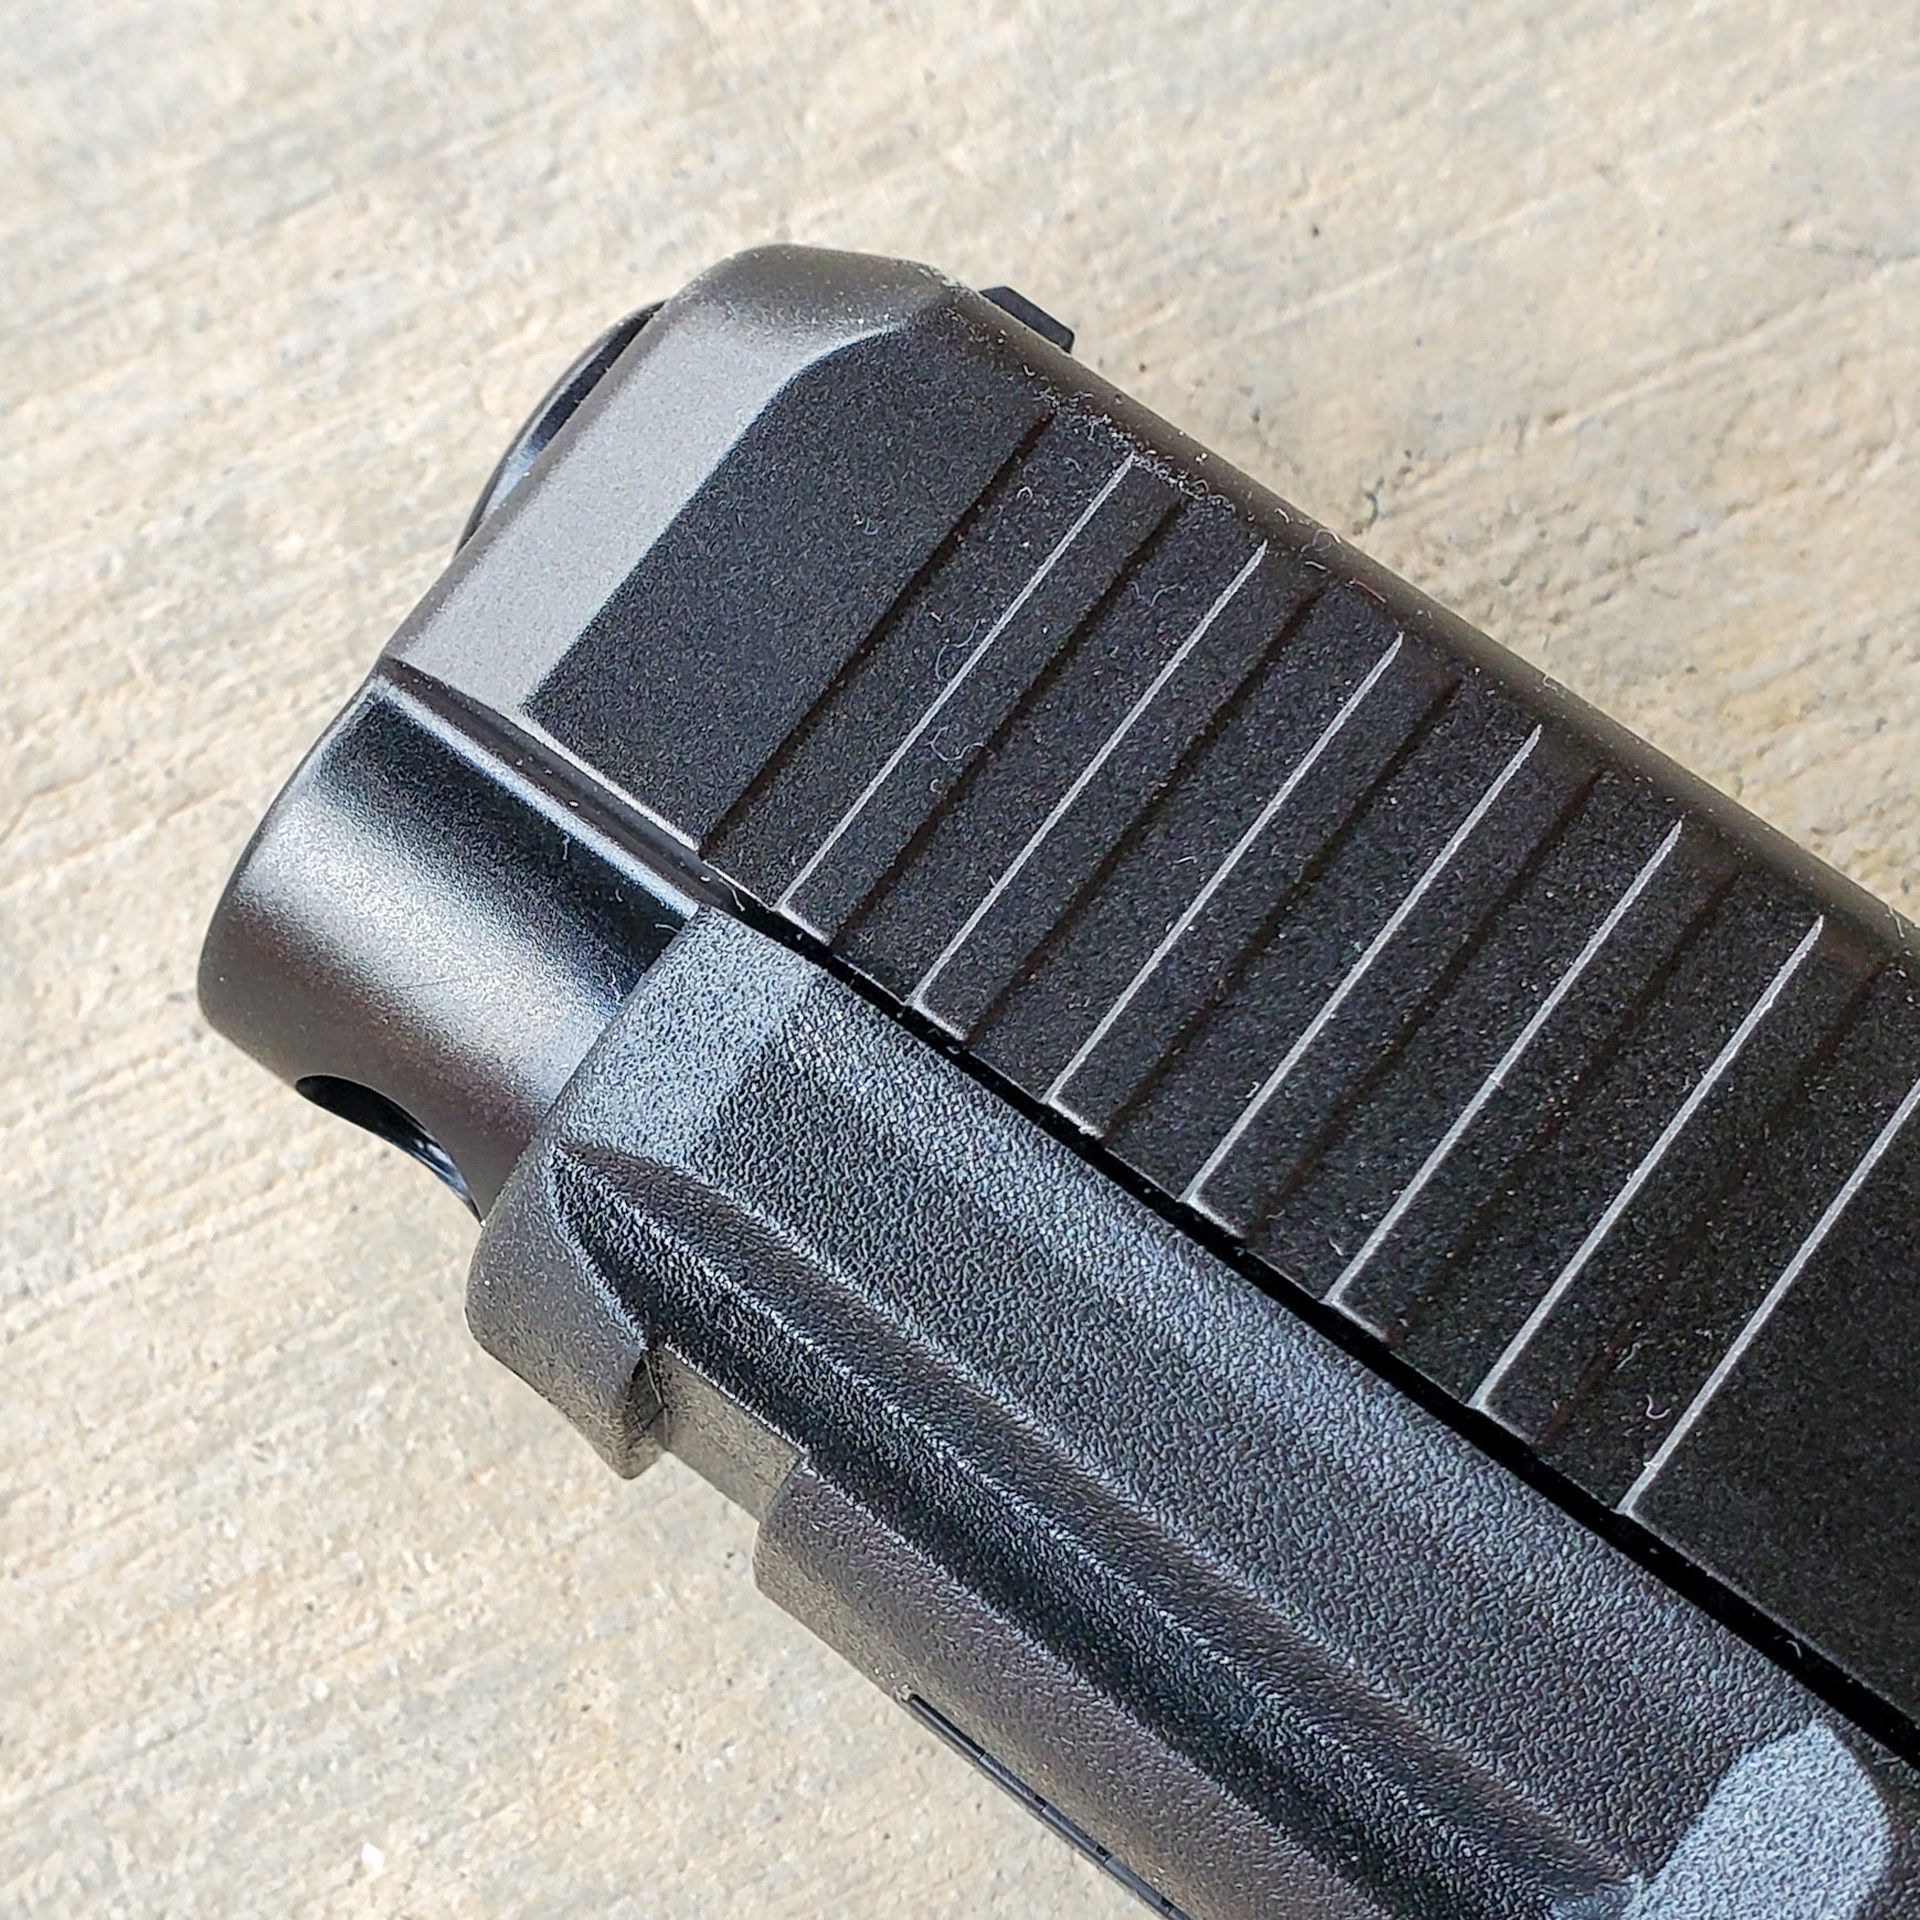 Glock 19 gen 5 9mm, with front cocking serrations